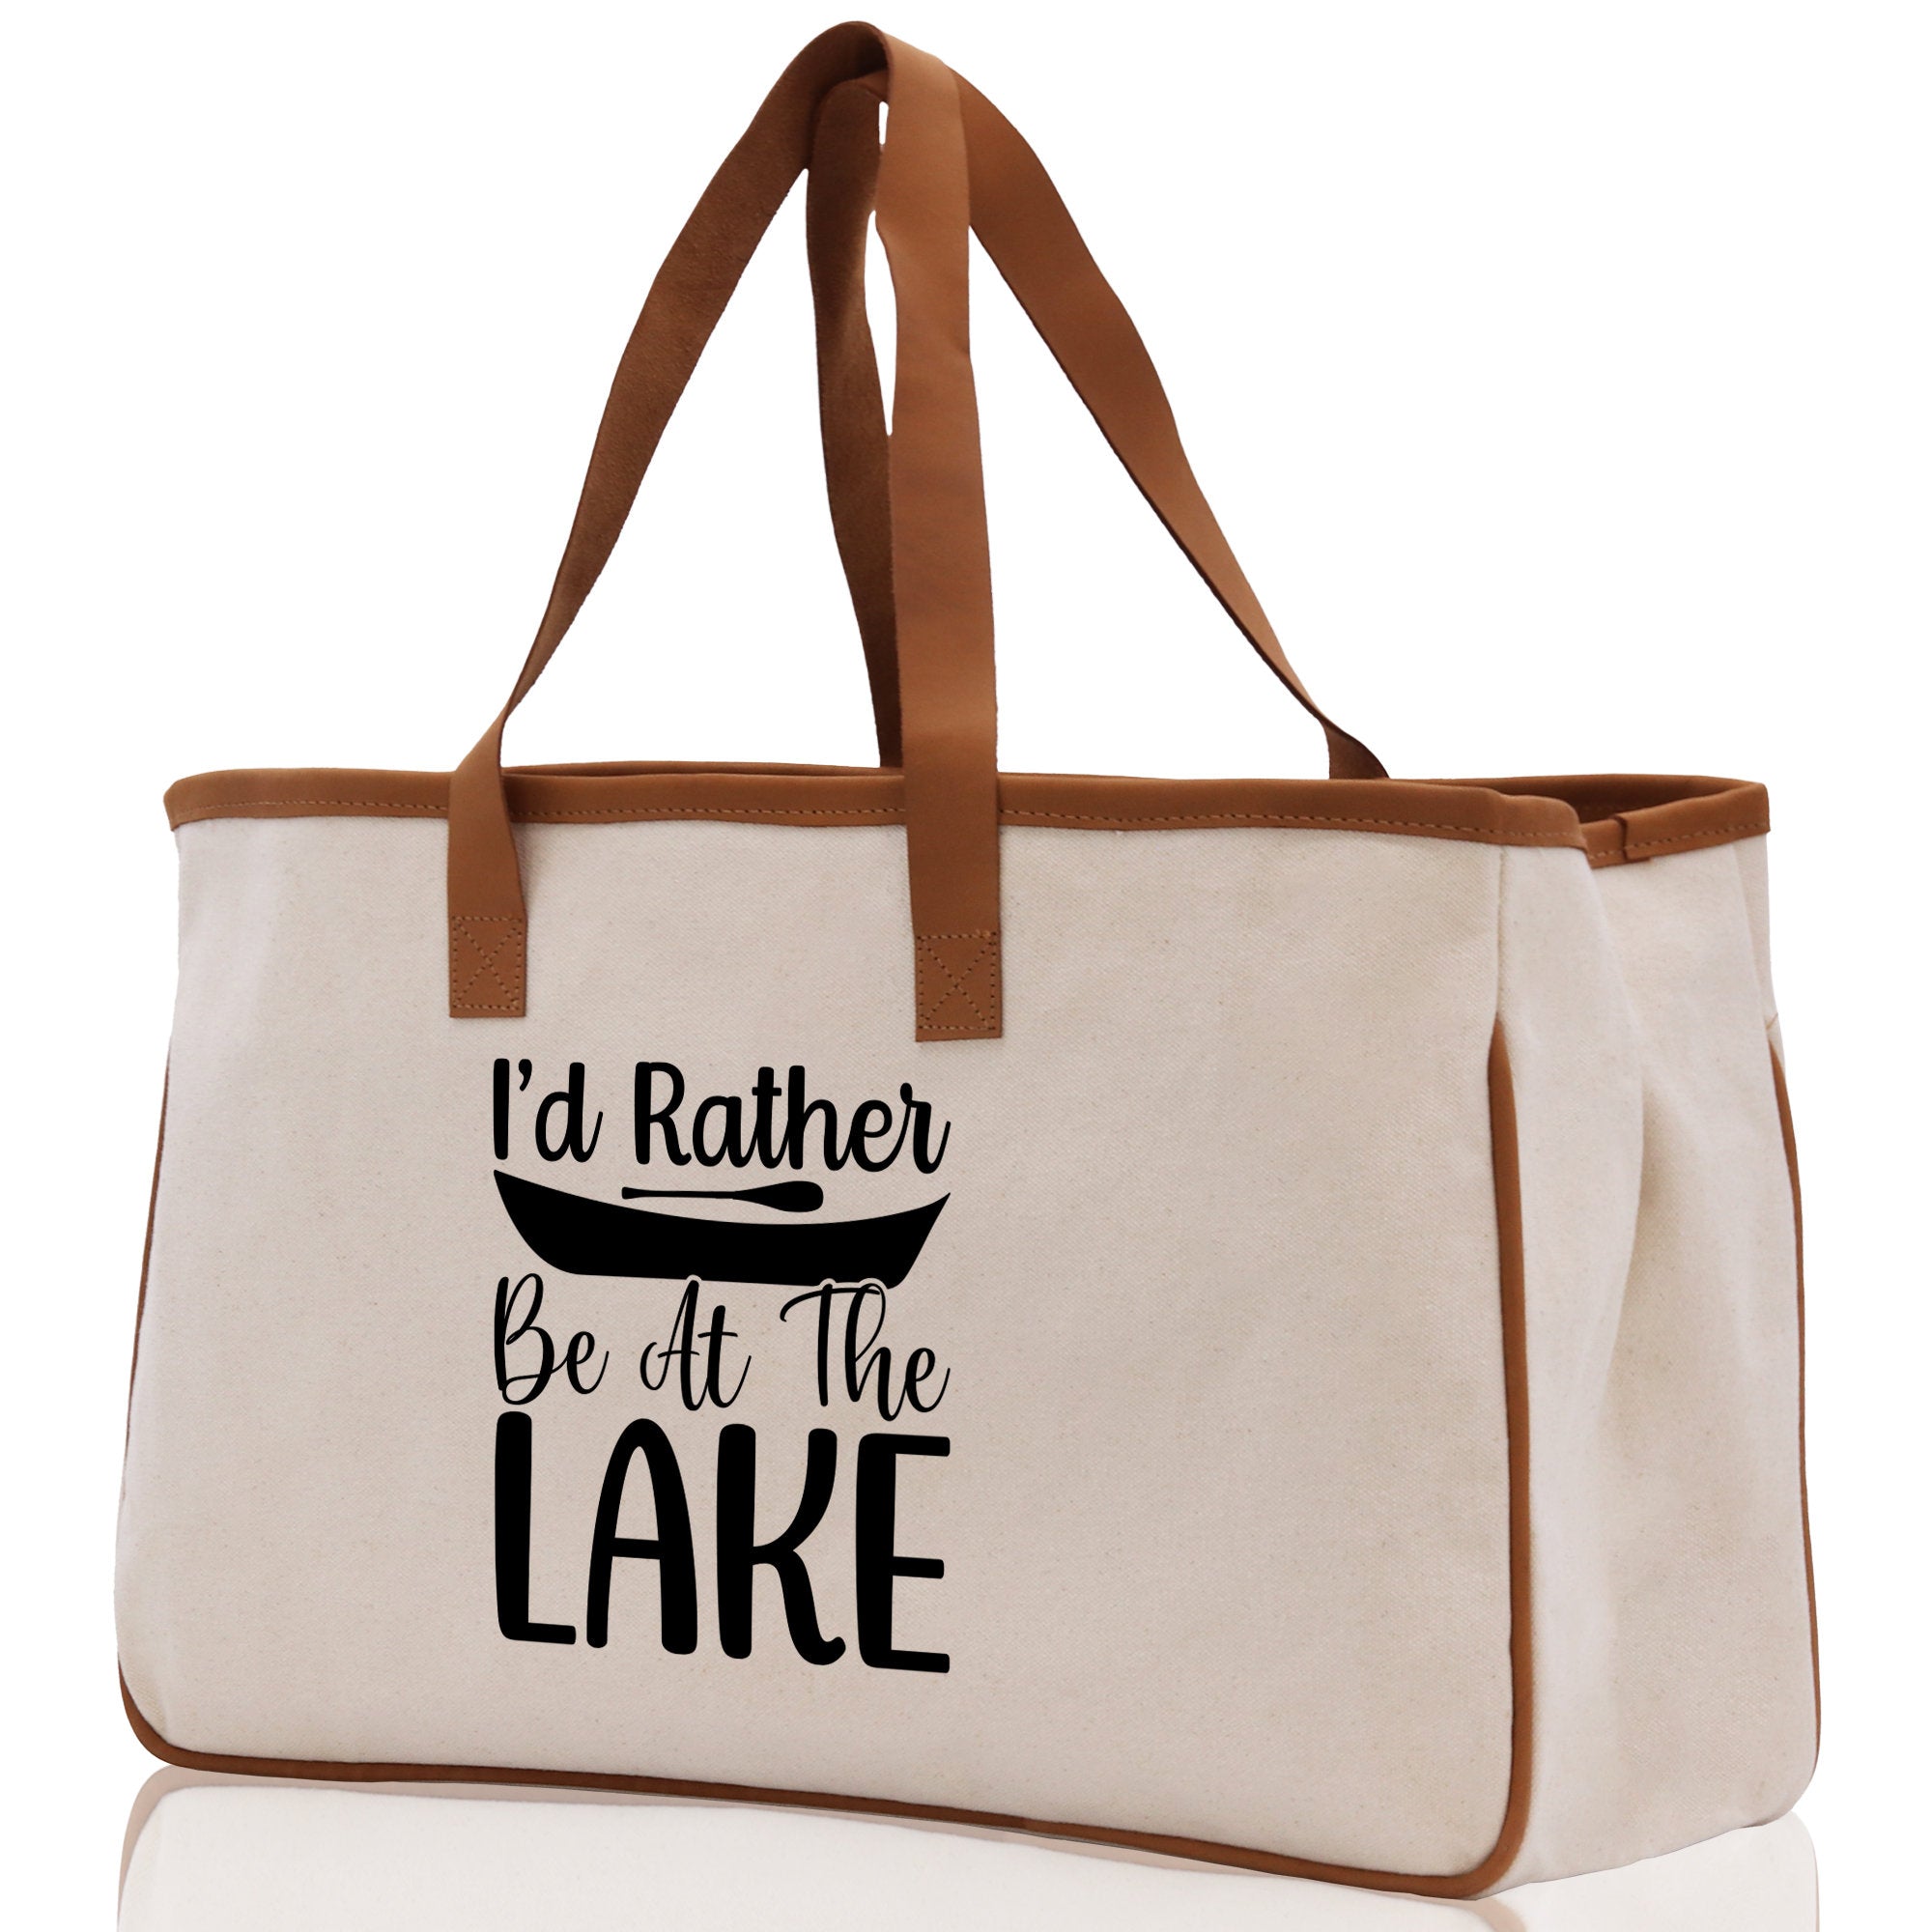 I'd Rather Be at the Lake Cotton Canvas Chic Tote Bag Camping Tote Lake Lover Gift Tote Bag Outdoor Tote Weekender Tote Laker Tote